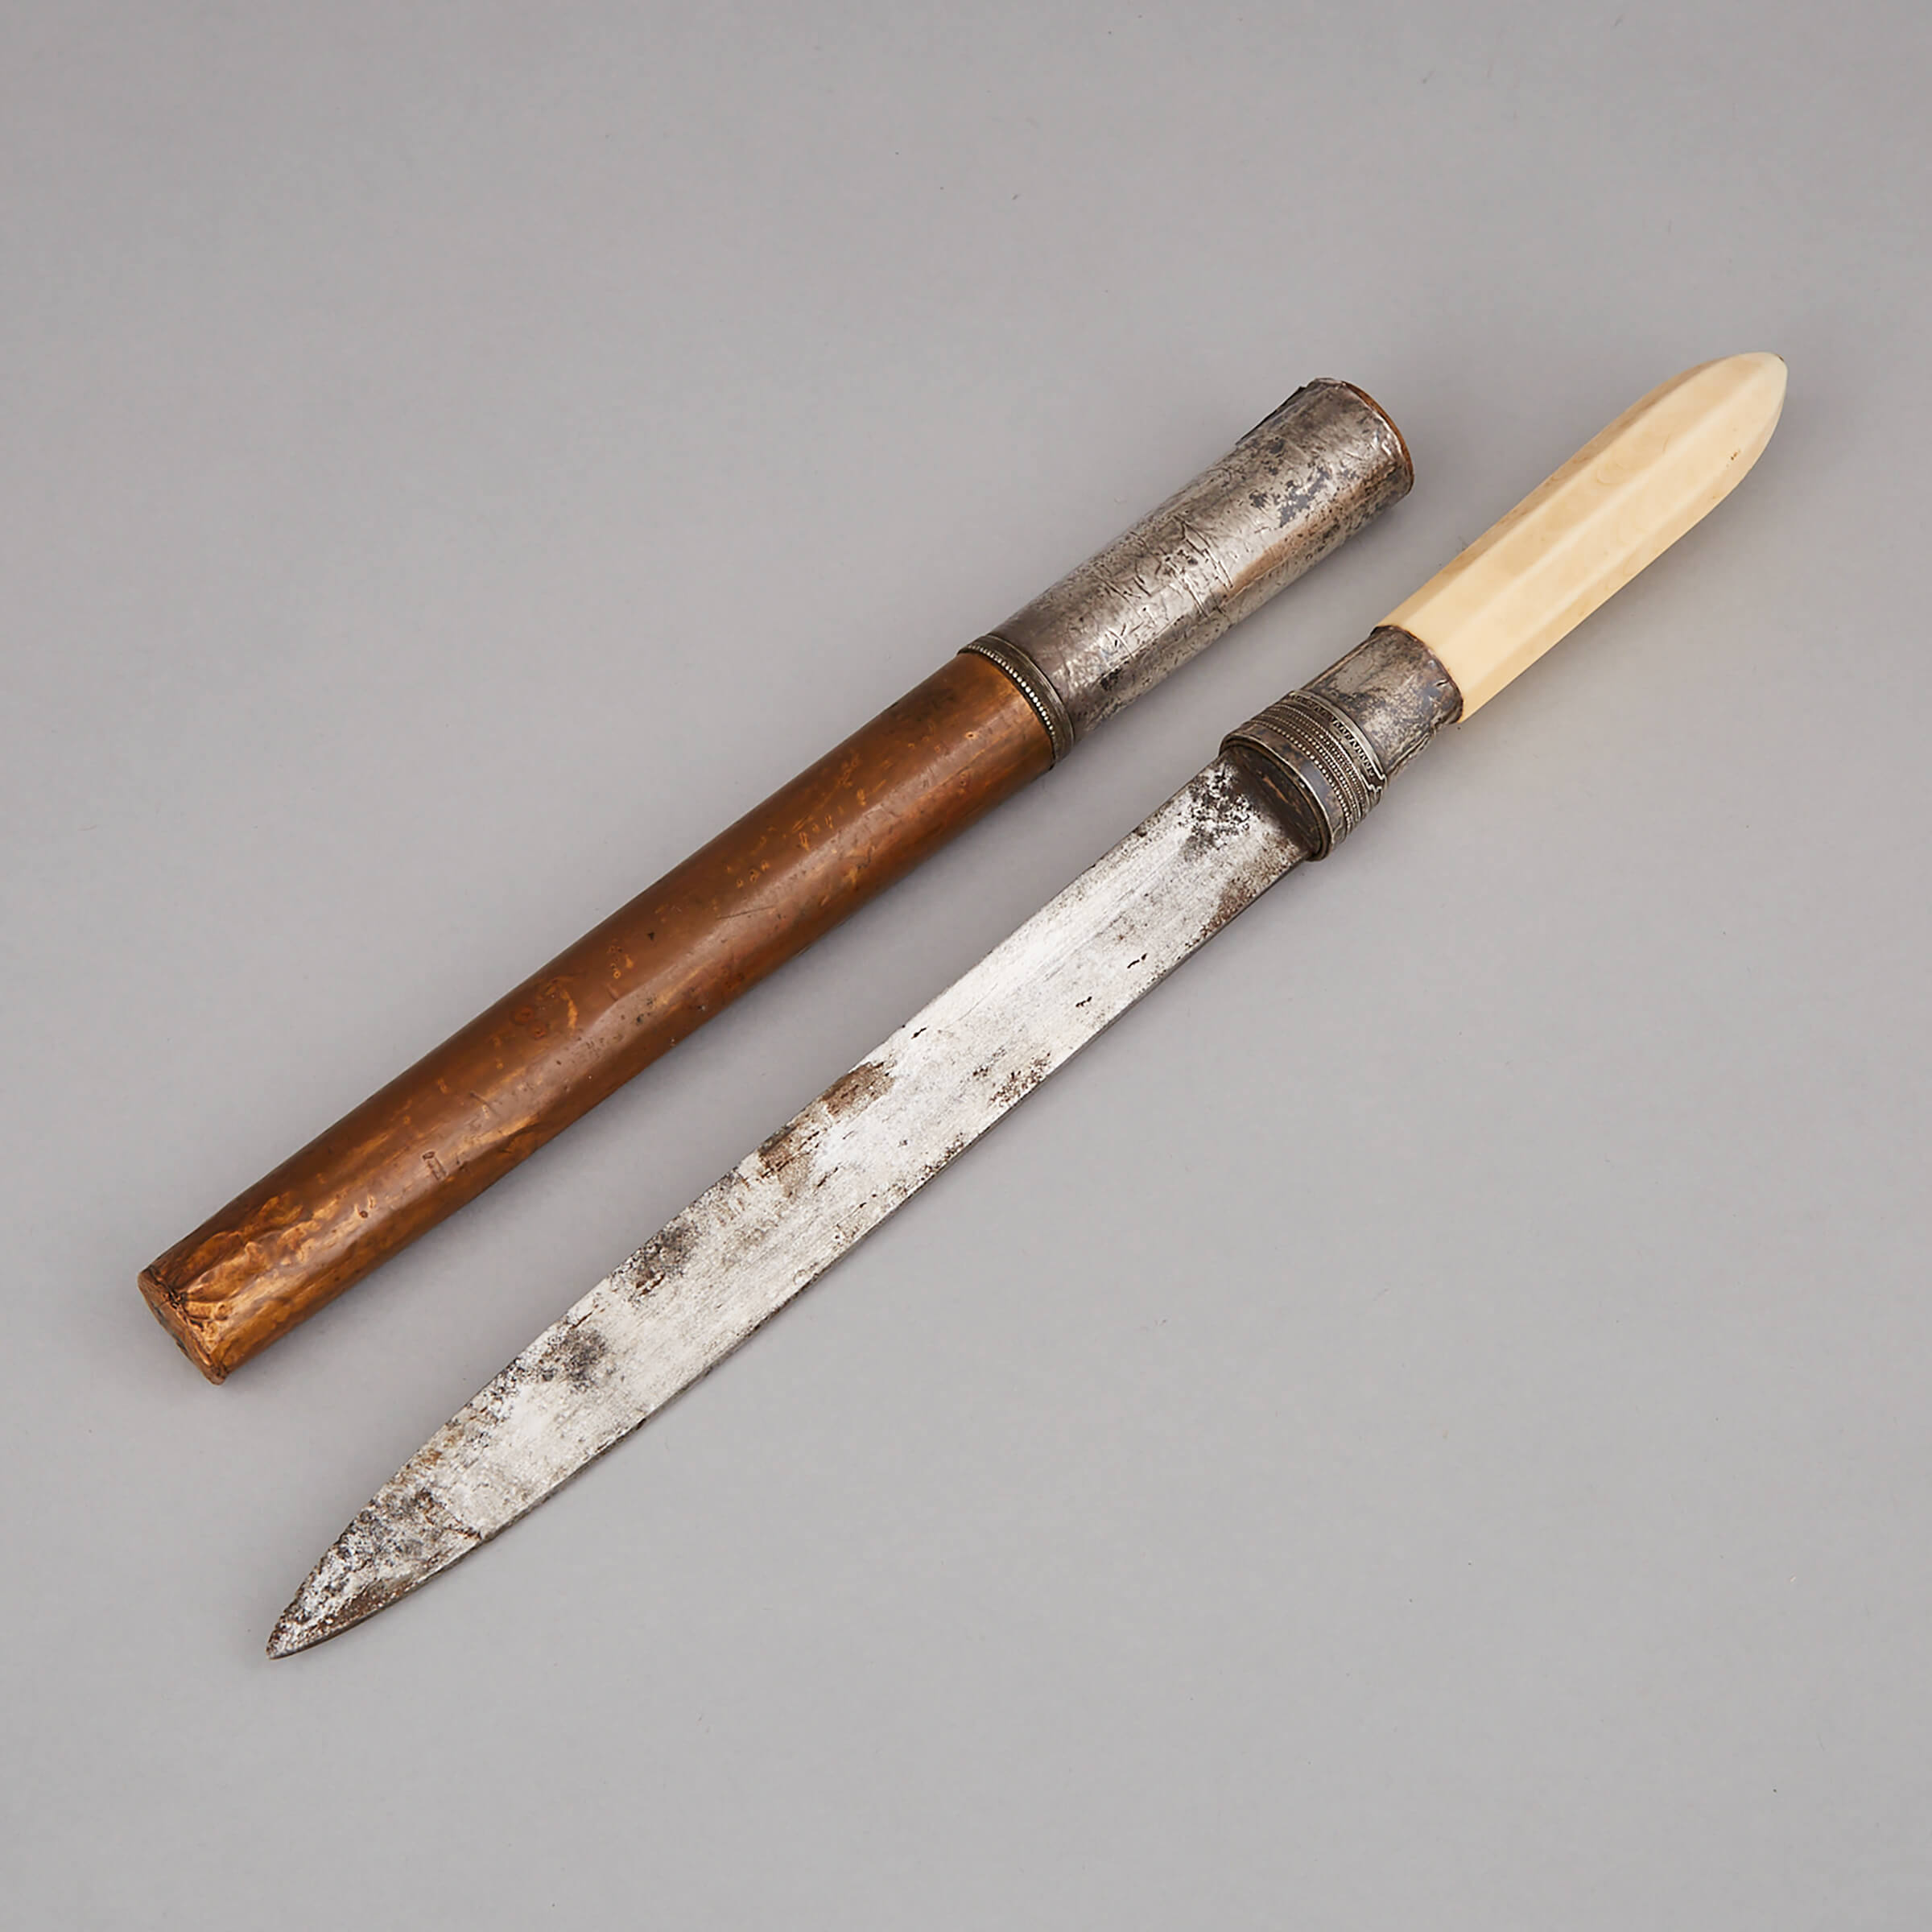 Burmese Silver Mounted Knife (Dha), mid 19th century